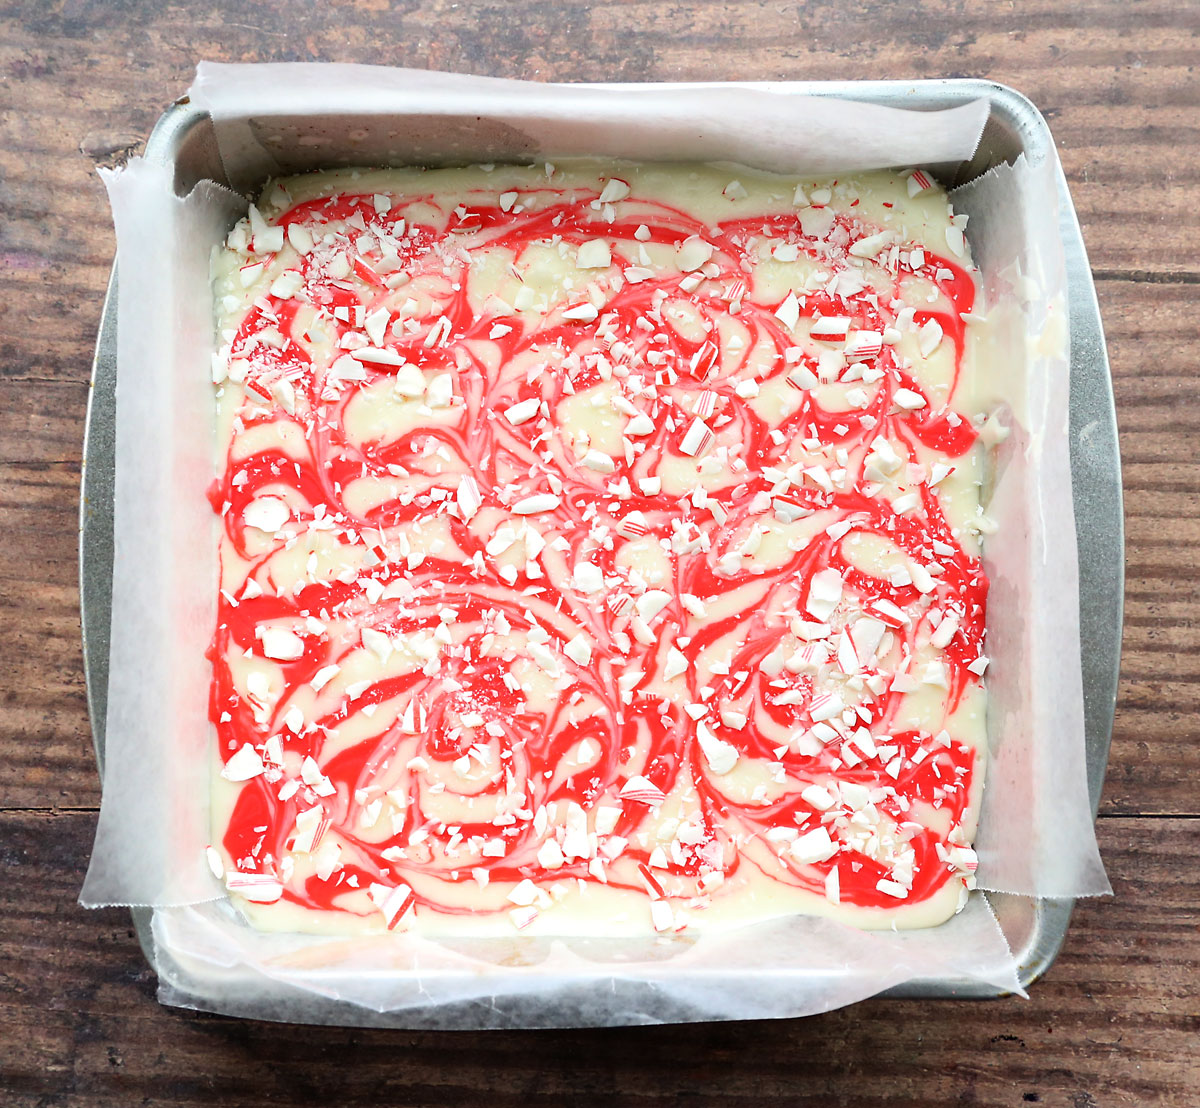 Lined 9x9 pan filled will peppermint bark fudge